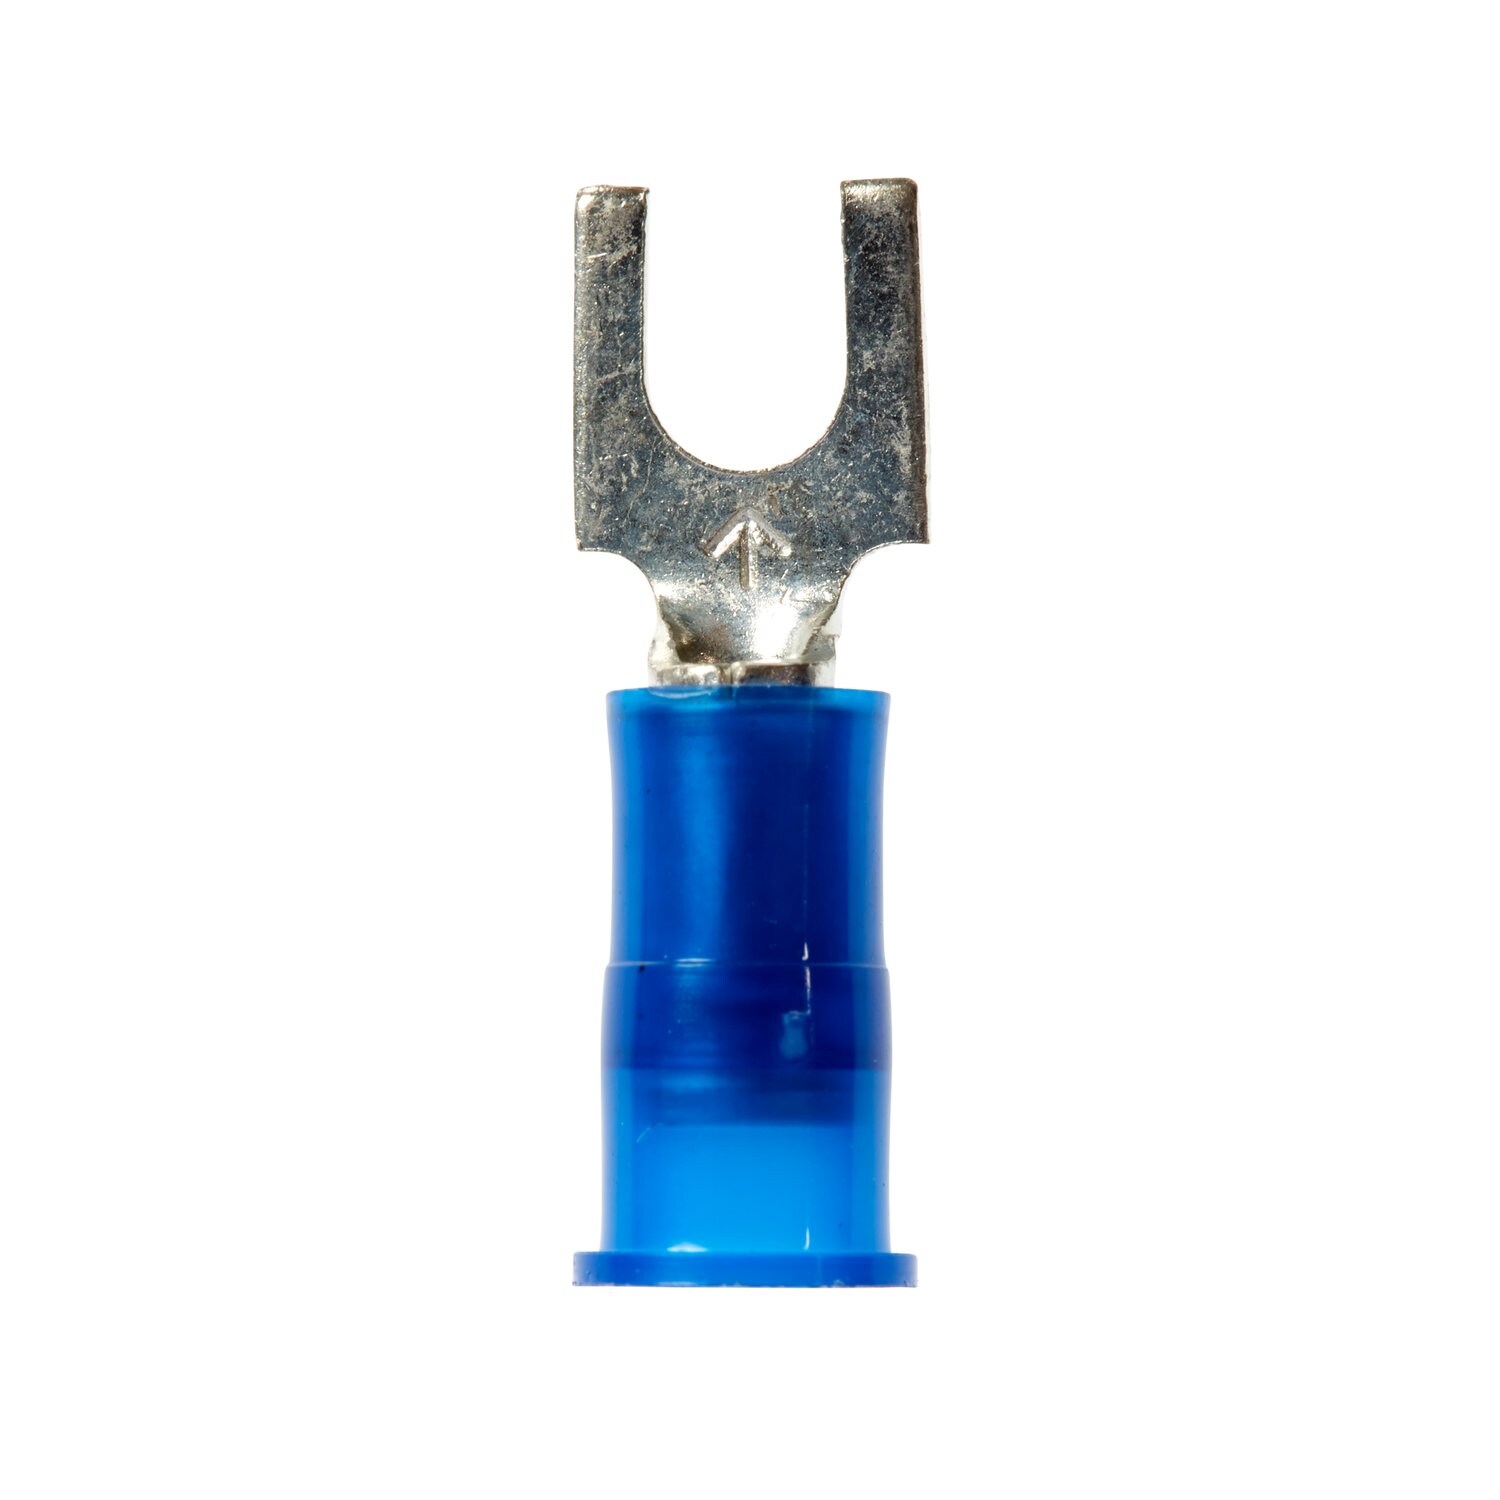 7000133307 - 3M Scotchlok Block Fork Nylon Insulated, 100/bottle, MNG14-8FBX,
suitable for use in a terminal block, 500/Case